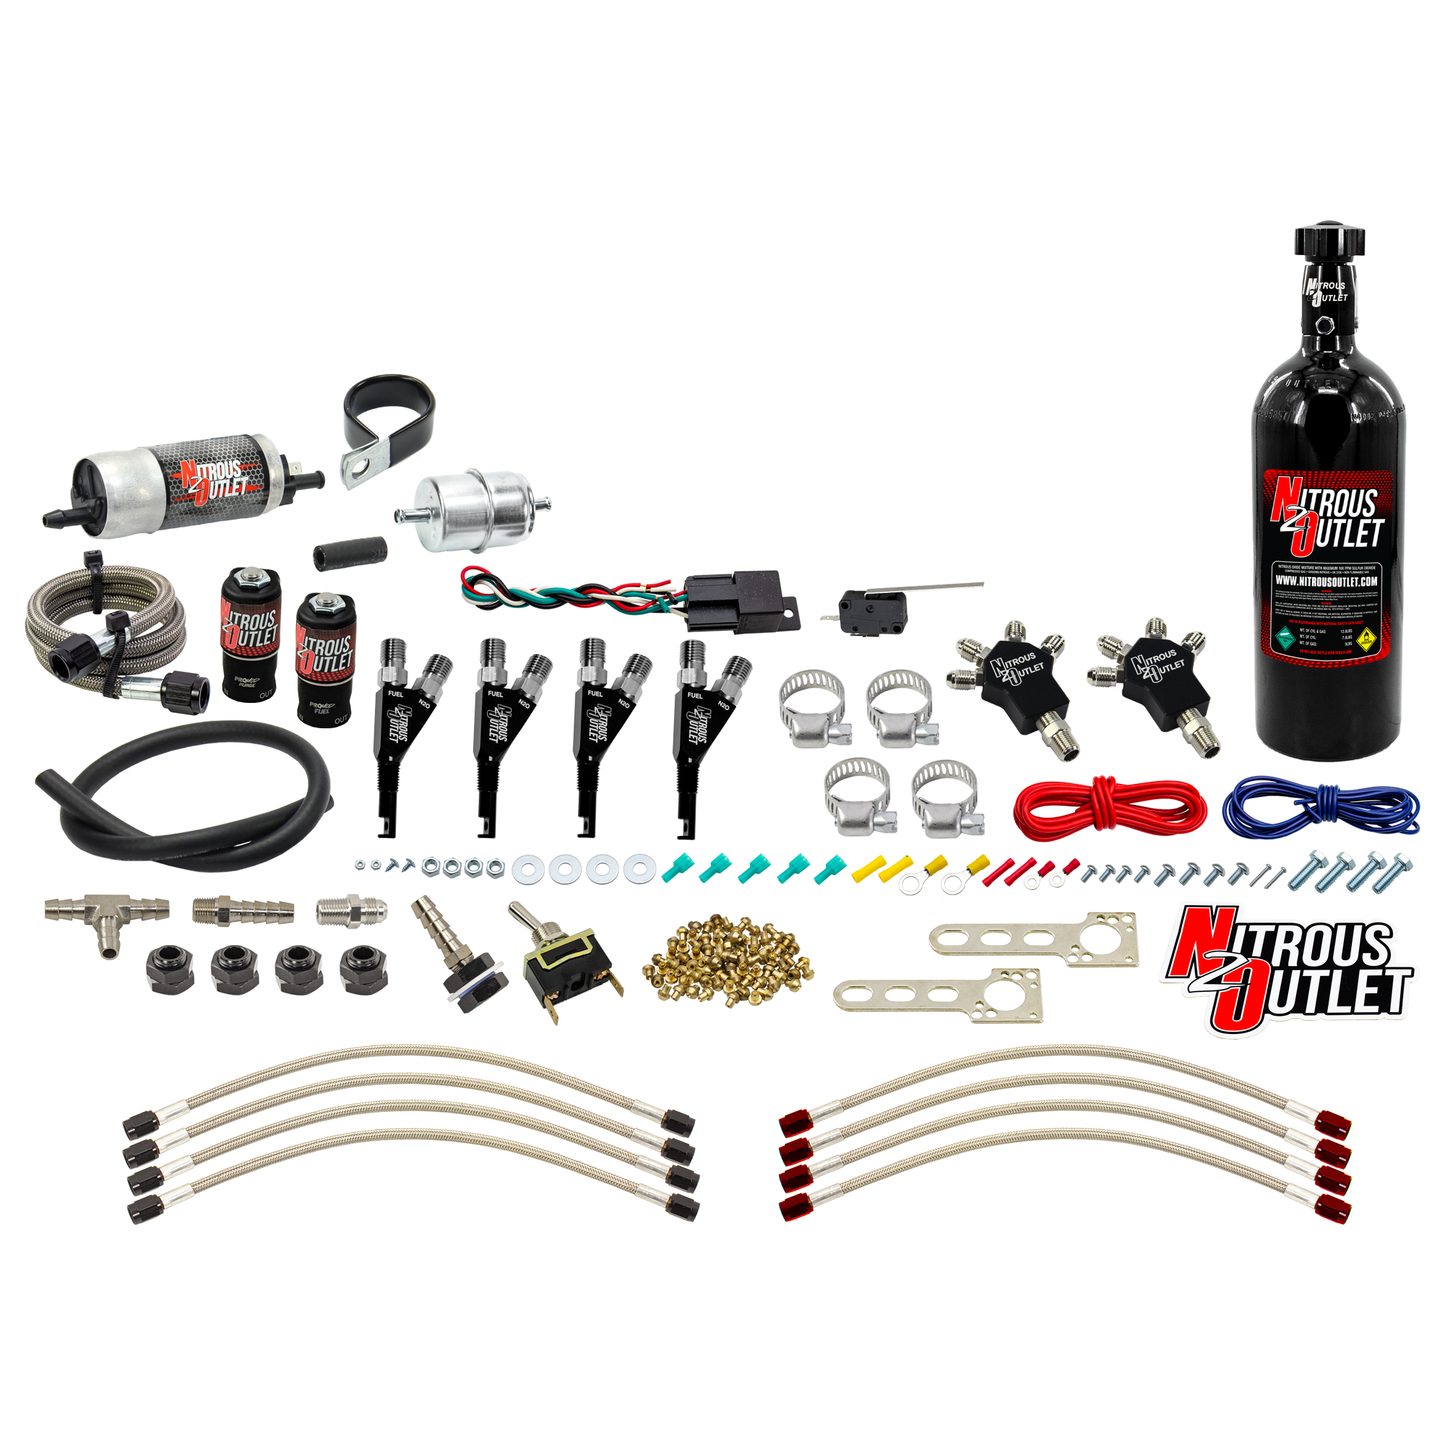 Powersports Carbureted Four Cylinder Nozzle System - .078 Nitrous/.155 Fuel - 90° Stainless Steel Nozzles